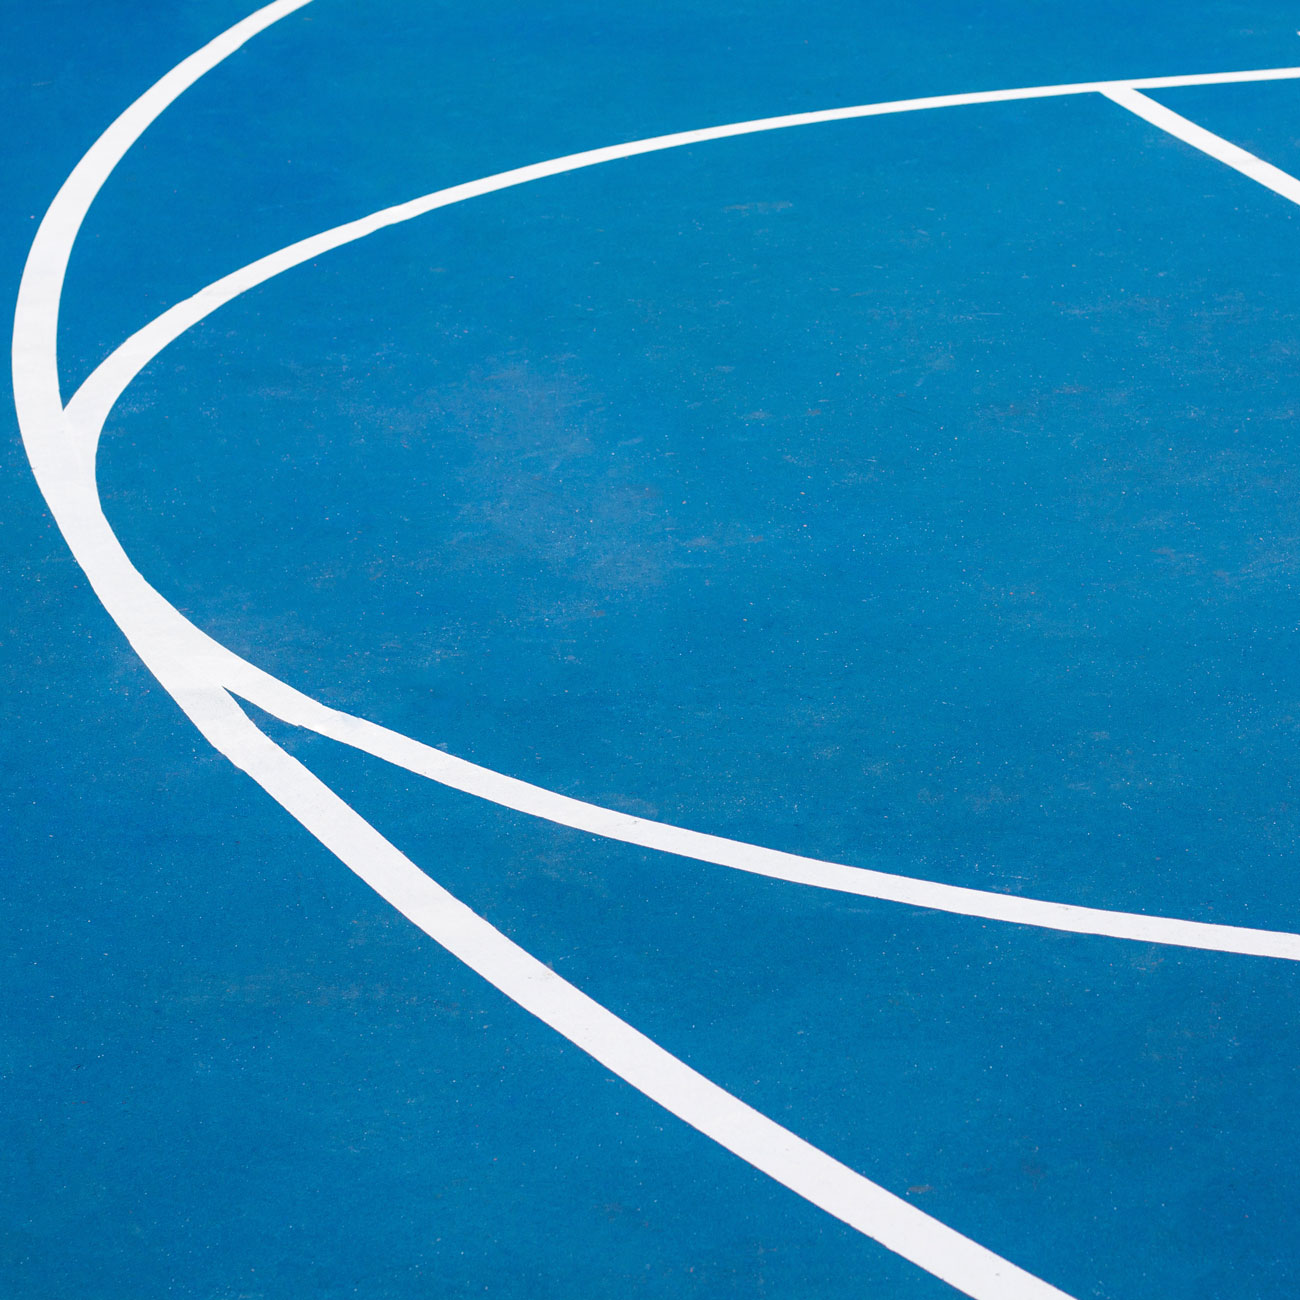 blue-basketball-court-that-can-be-used-alone-or-as-2021-09-04-11-13-25-utc